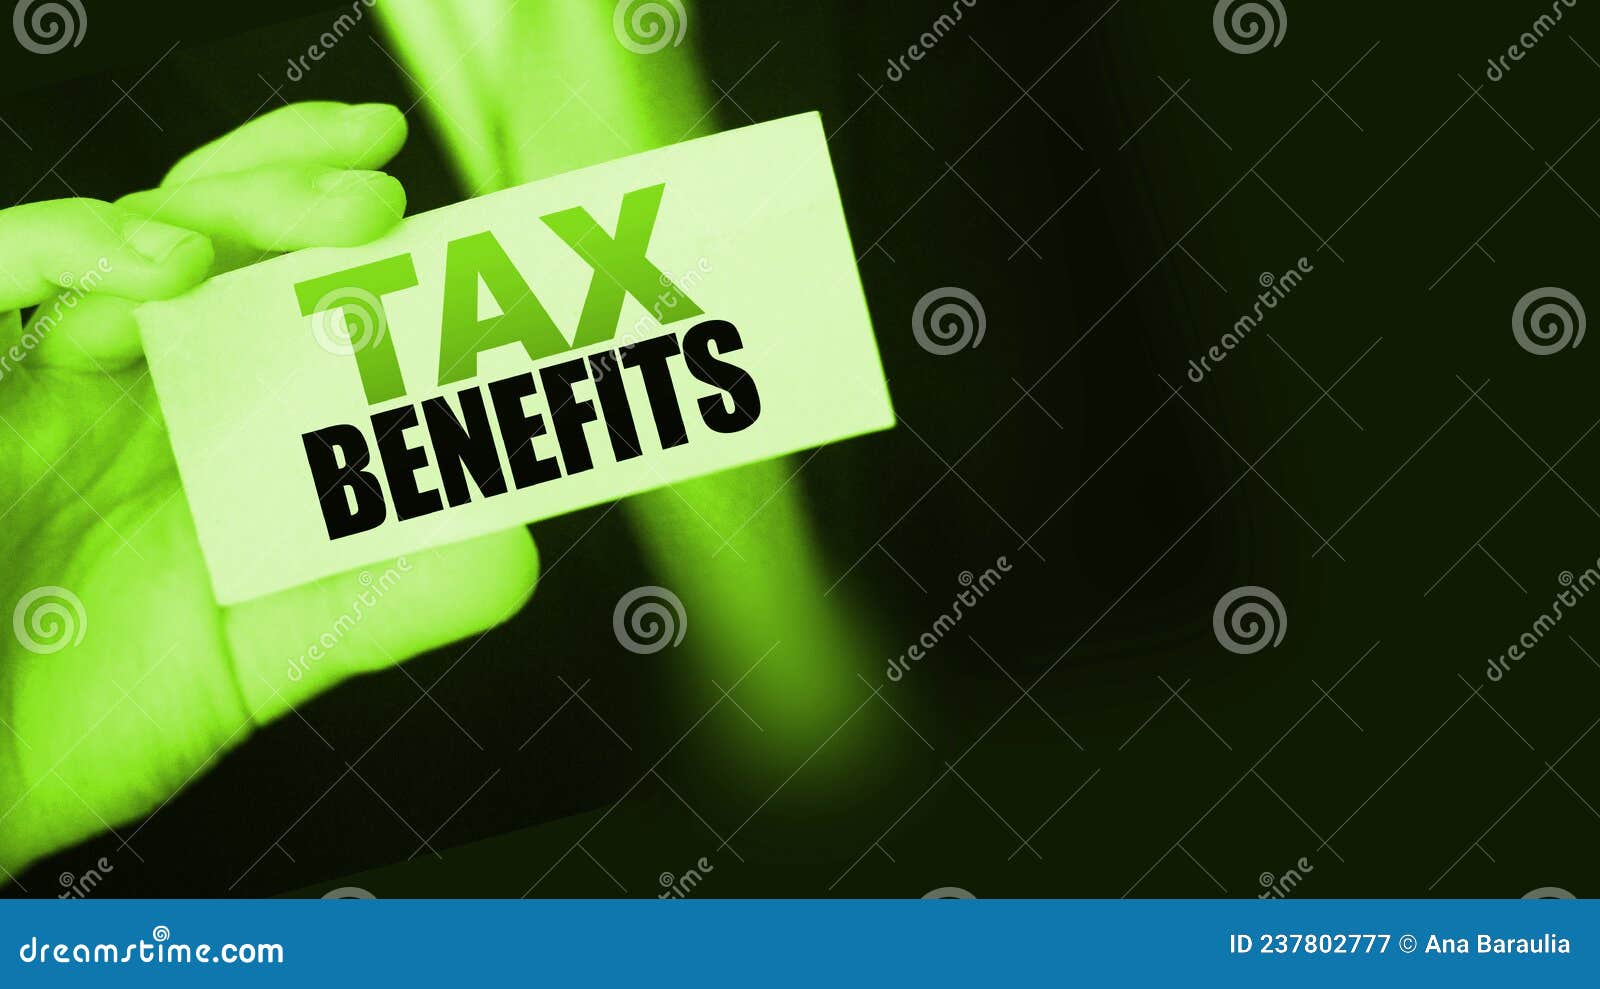 businessman-shows-a-card-with-text-tax-benefits-taxes-and-fees-policy